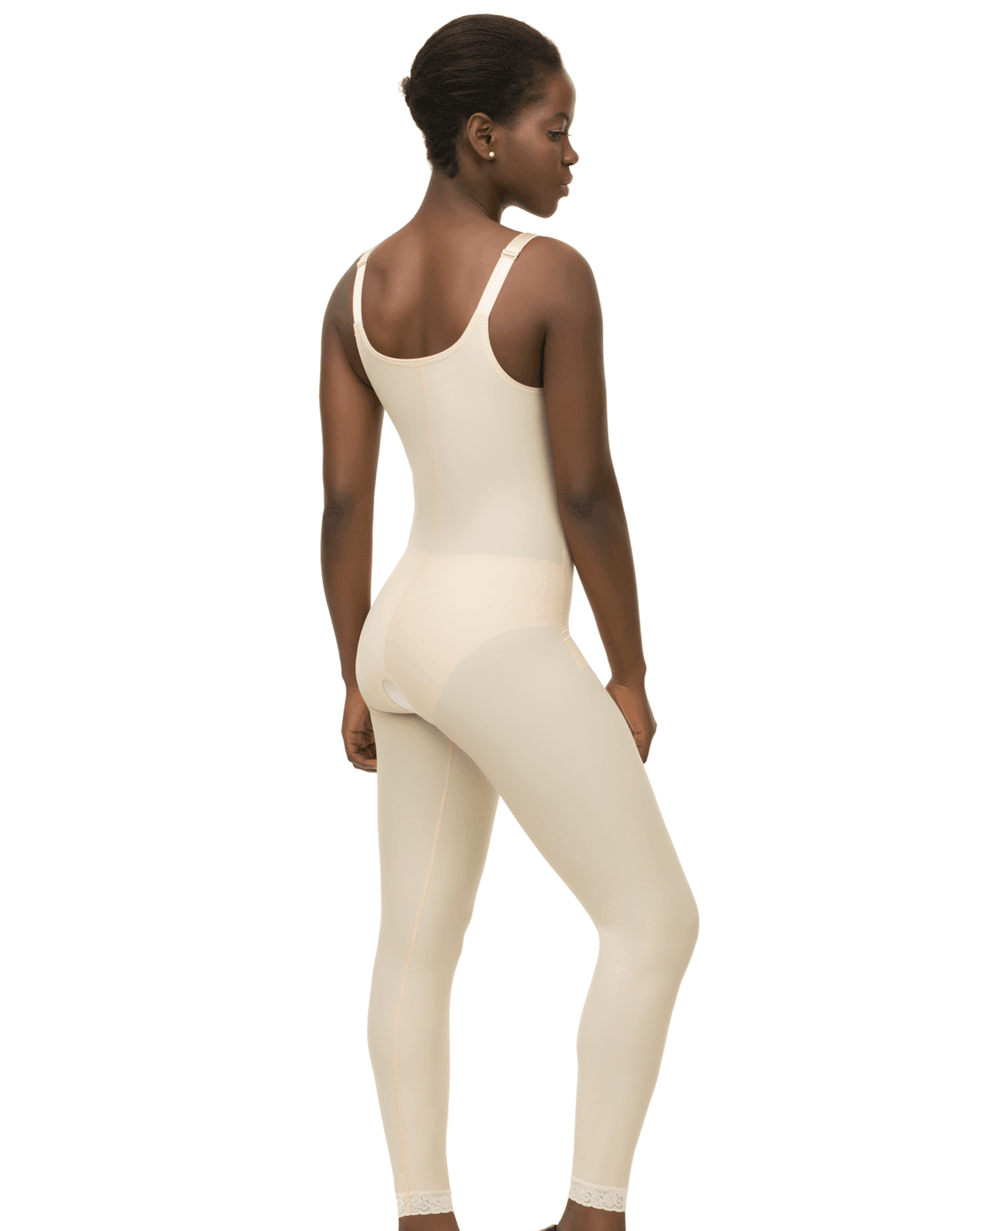 Isavela 2nd Stage Body Suit Mid Thigh Length W/Suspender Plastic Surgery Compression  Garment BS04 